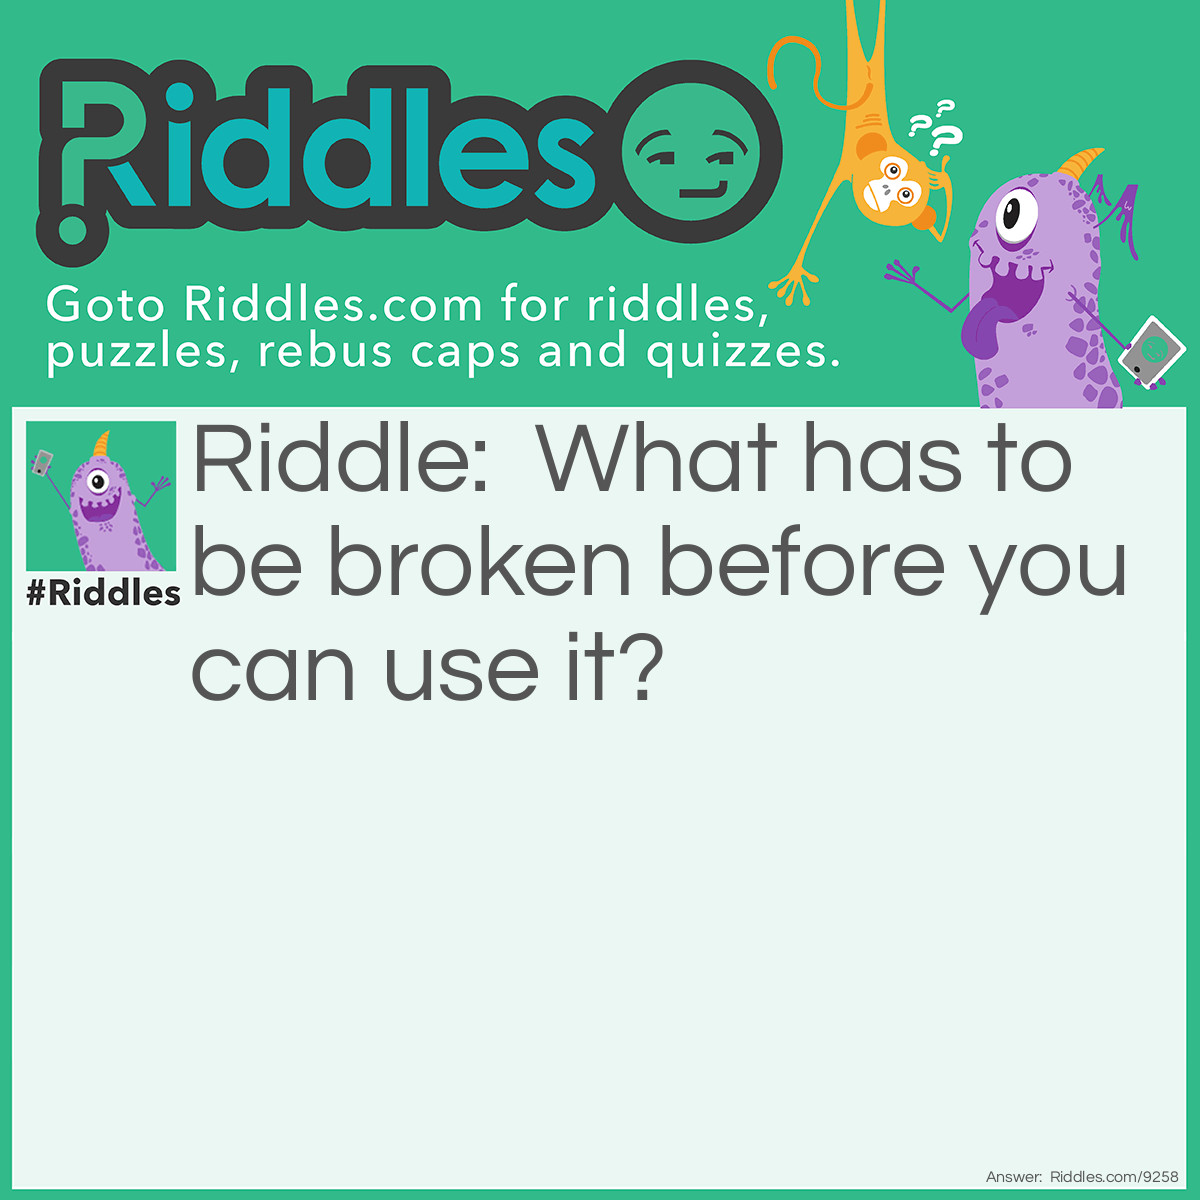 Riddle: What has to be broken before you can use it? Answer: An egg.